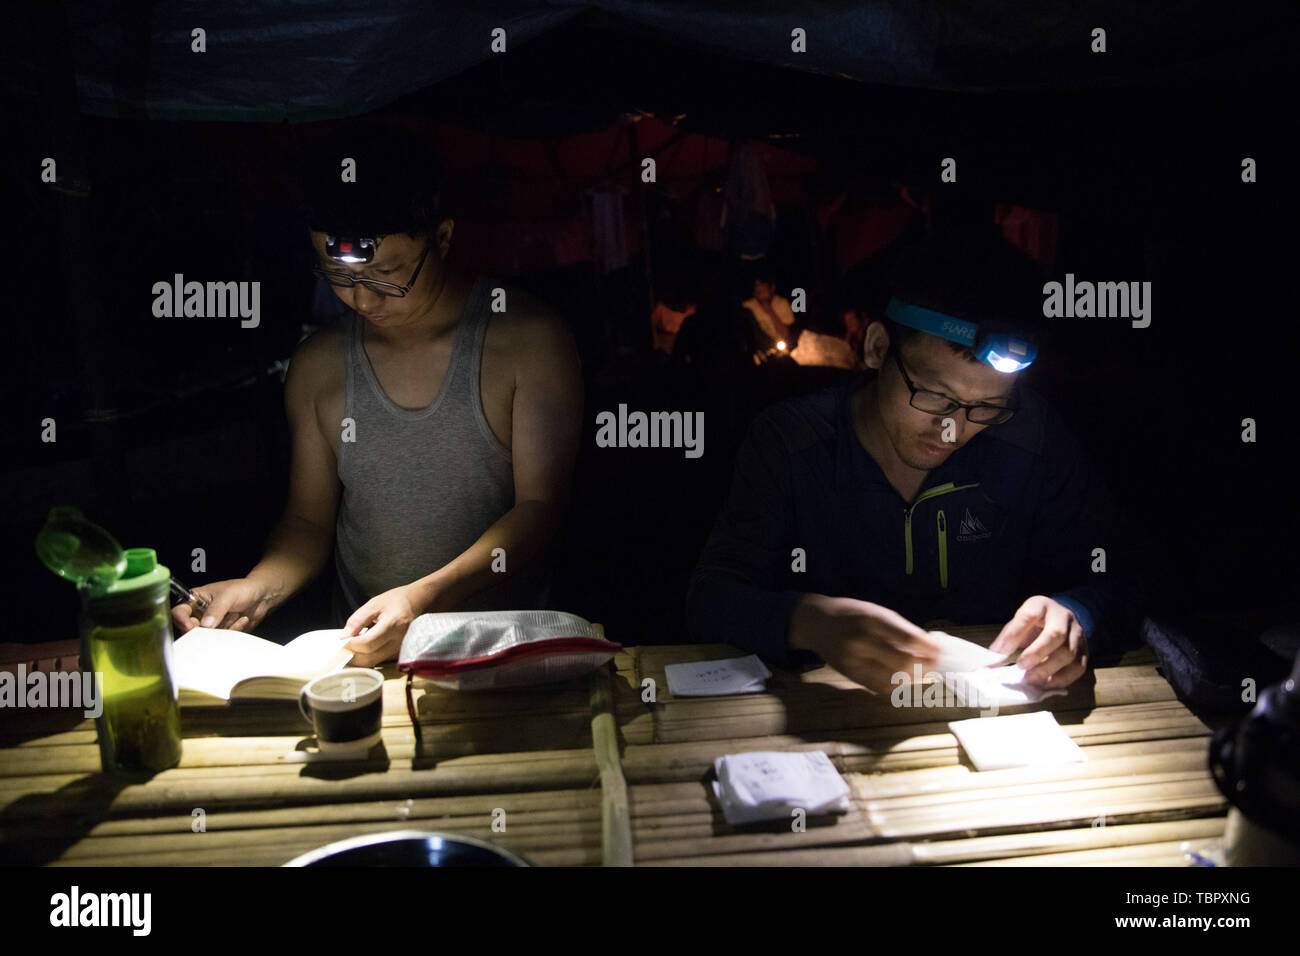 (190603) -- TAMANTHI, June 3, 2019 (Xinhua) -- Chinese researchers check plant samples at their campsite in the Tamanthi Wildlife Sanctuary in north Myanmar, May 27, 2019. A China-Myanmar joint field expedition, made up with researchers from the Southeast Asia Biodiversity Research Institute of the Chinese Academy of Sciences (CAS-SEABRI) and the Natural Resources and Environmental Conservation of Myanmar, is doing researches on the biodiversity of the Tamanthi Wildlife Sanctuary in northern Myanmar. The expedition, the eighth of its kind since 2014, began on May 14 and will last till June 15. Stock Photo